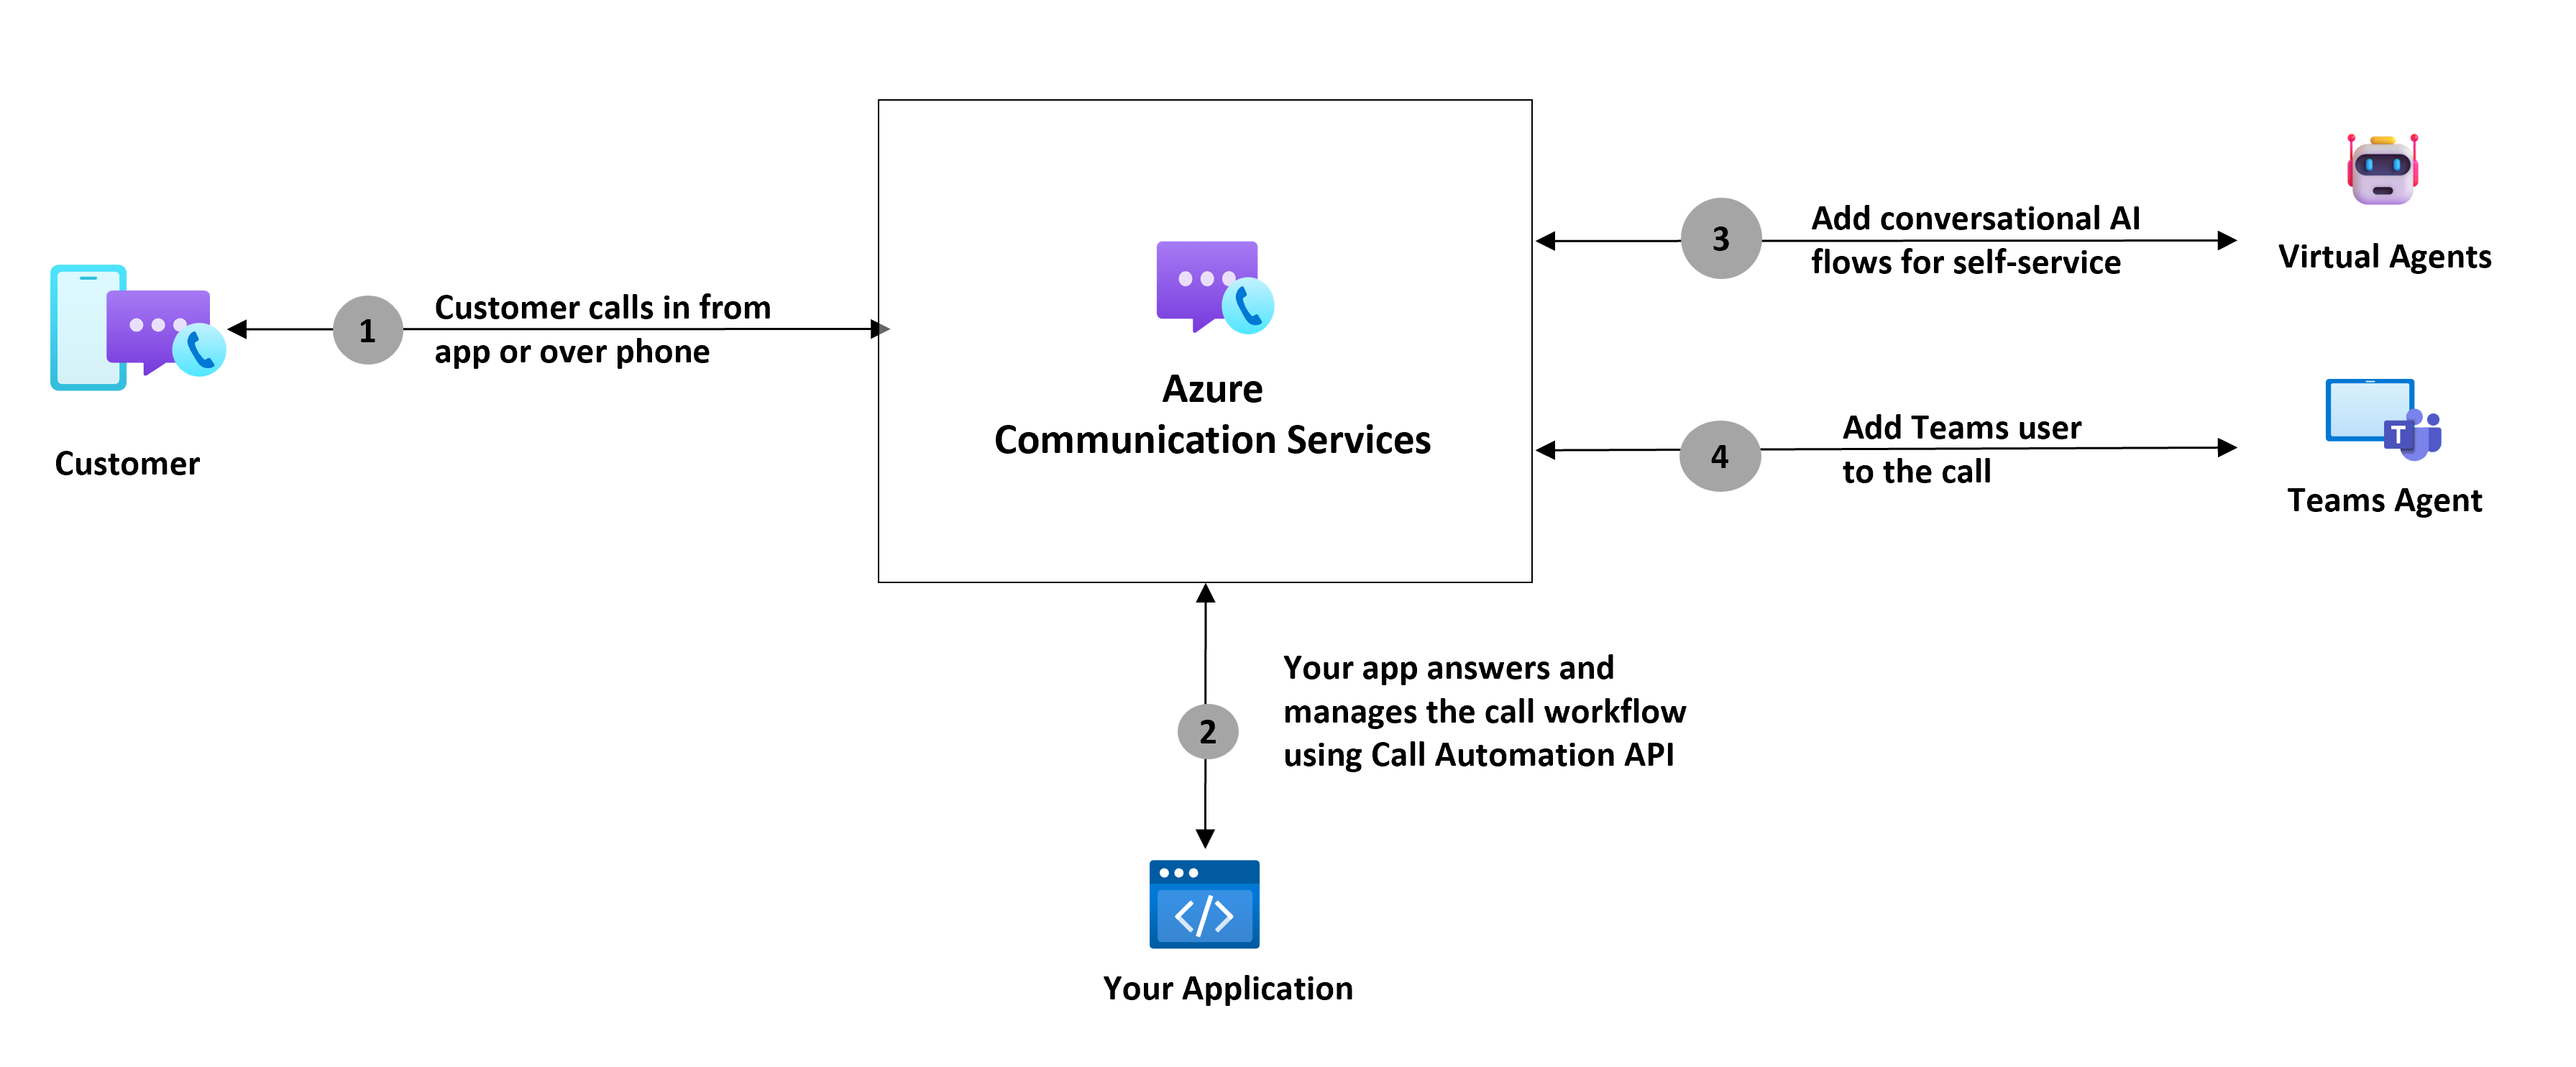 Diagram of calling flow for a customer service with Microsoft Teams and Call Automation.